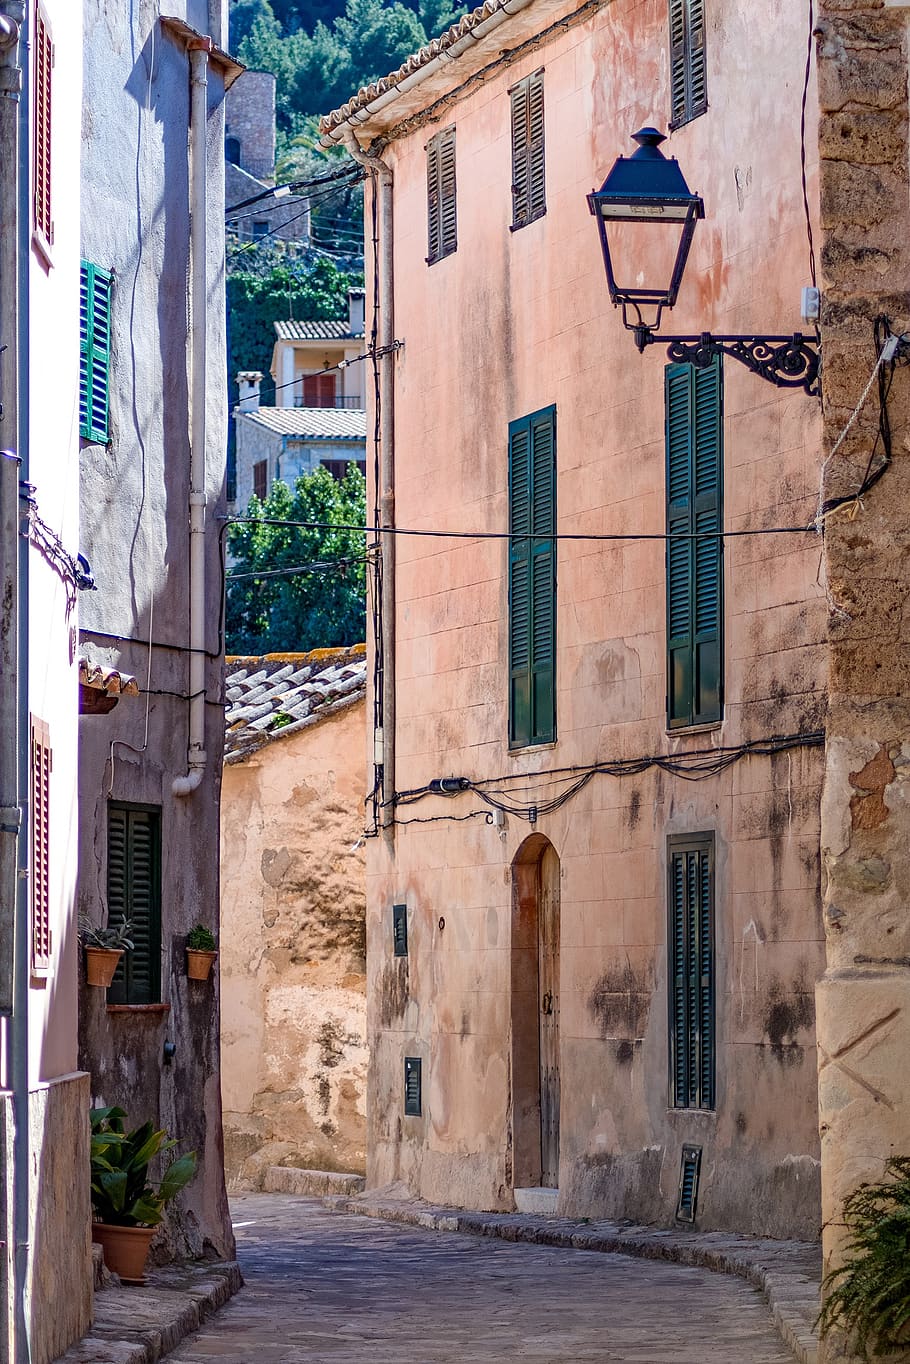 mallorca, estellencs, alley, architecture, old, city, road, historic old town, building, houses